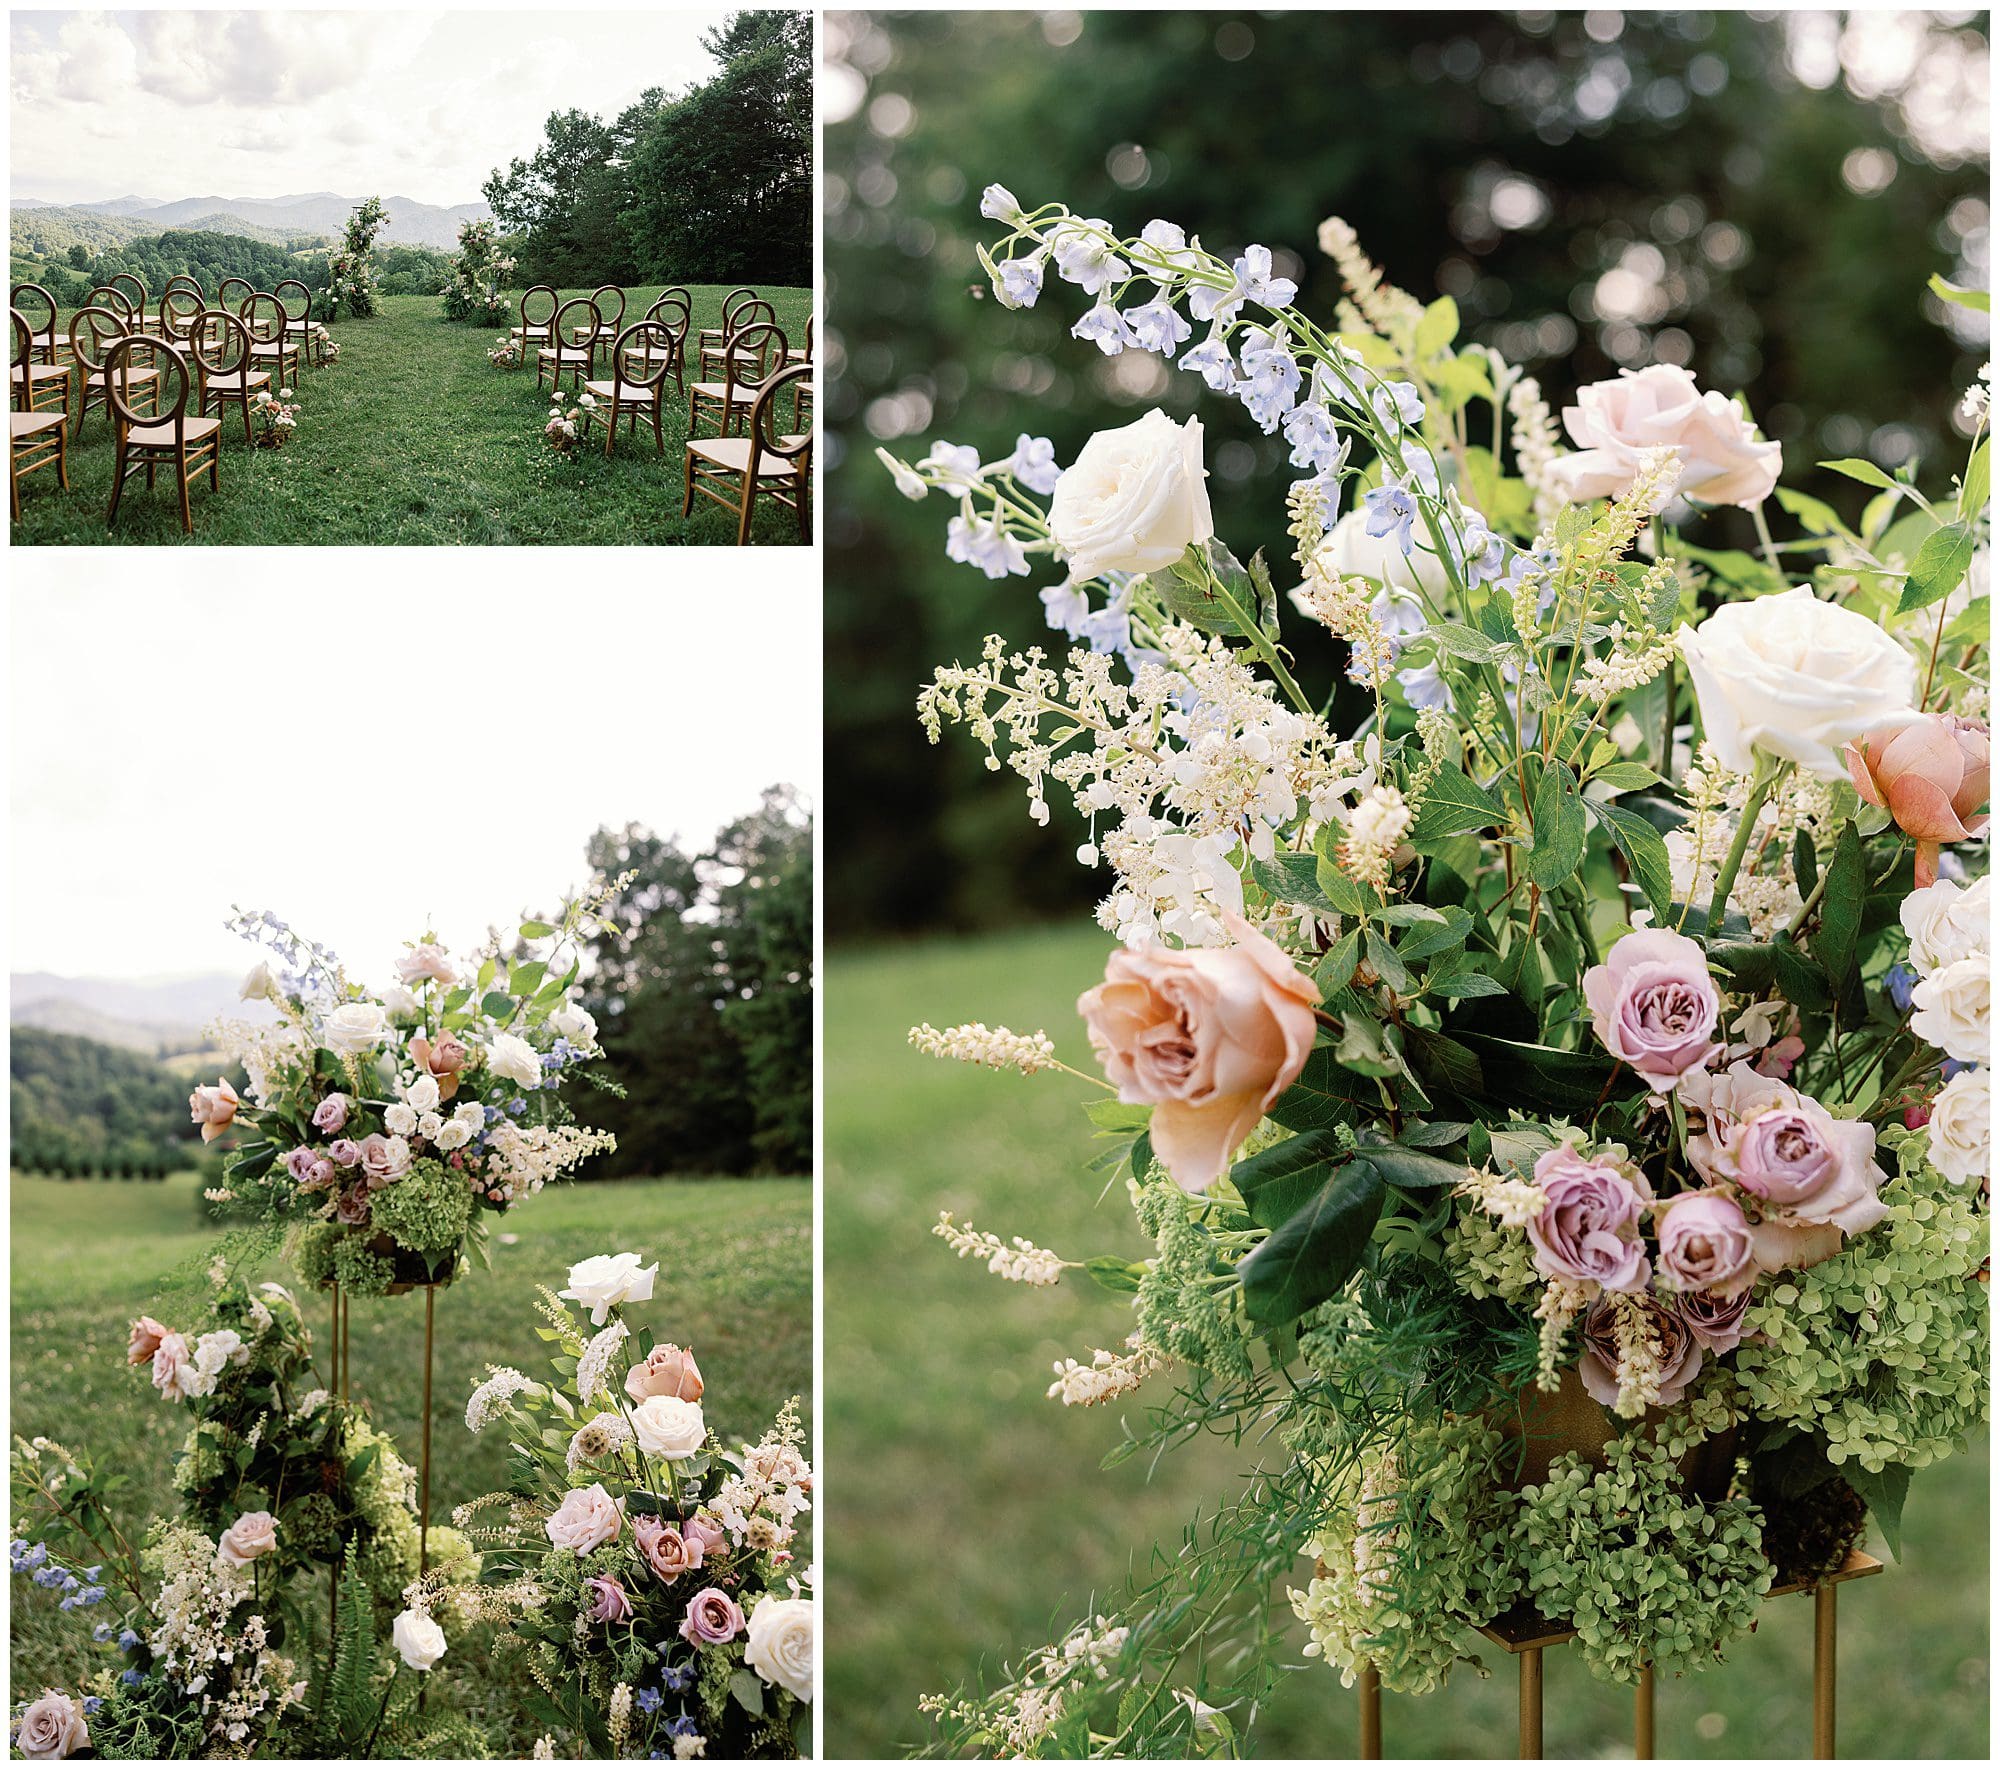 A Parisian-inspired summer wedding set up in a field with flowers at The Ridge.